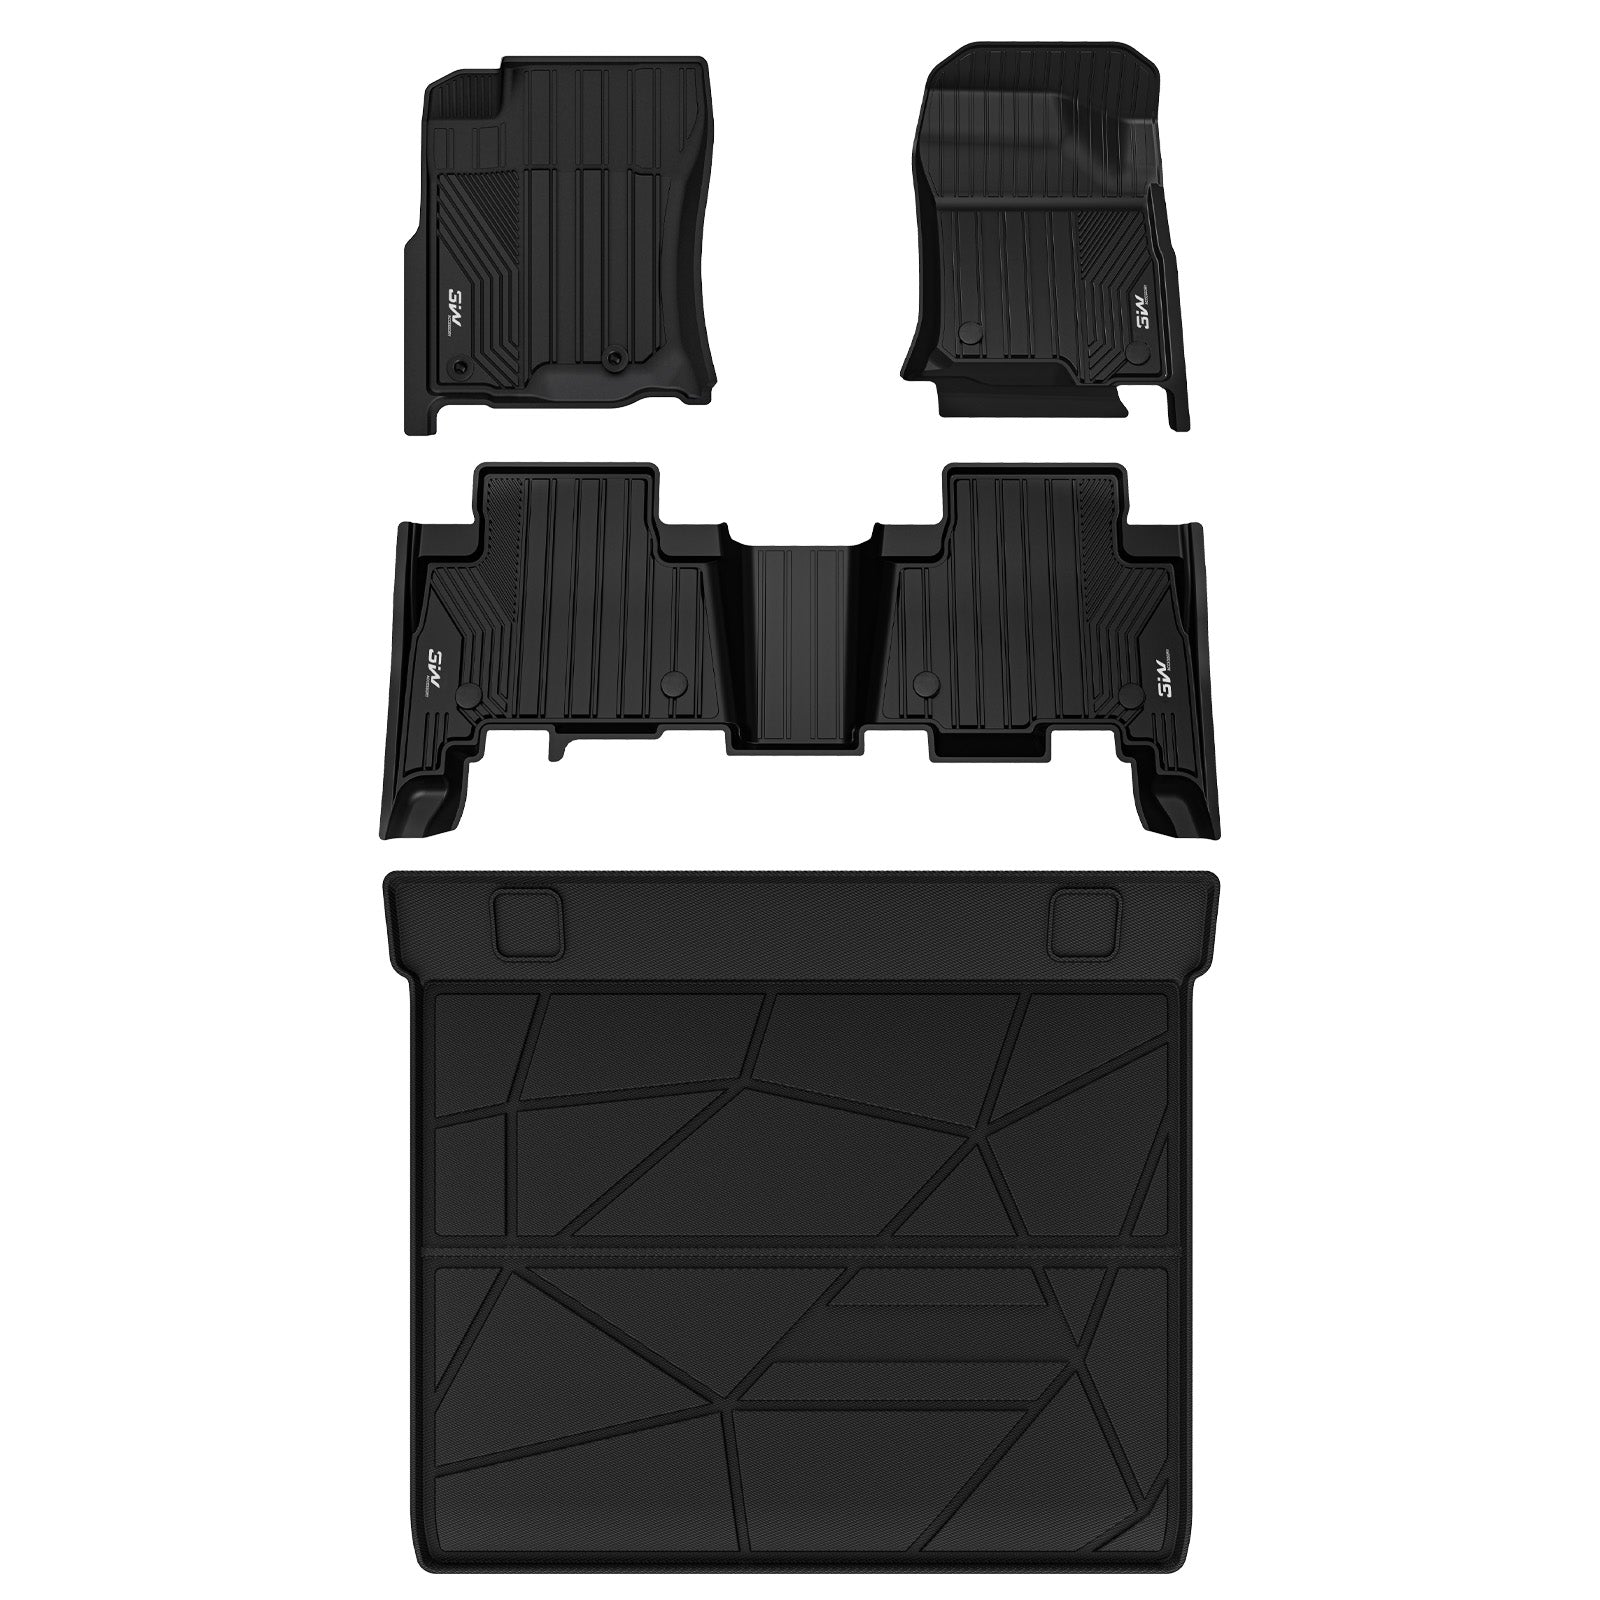 3W LEXUS GX460 2014-2023 (Only for 5 Seats) Custom Floor Mats TPE Material & All-Weather Protection Vehicles & Parts 3w 2014-2023 GX460 2014-2023 1st&2nd Row+Trunk Mat